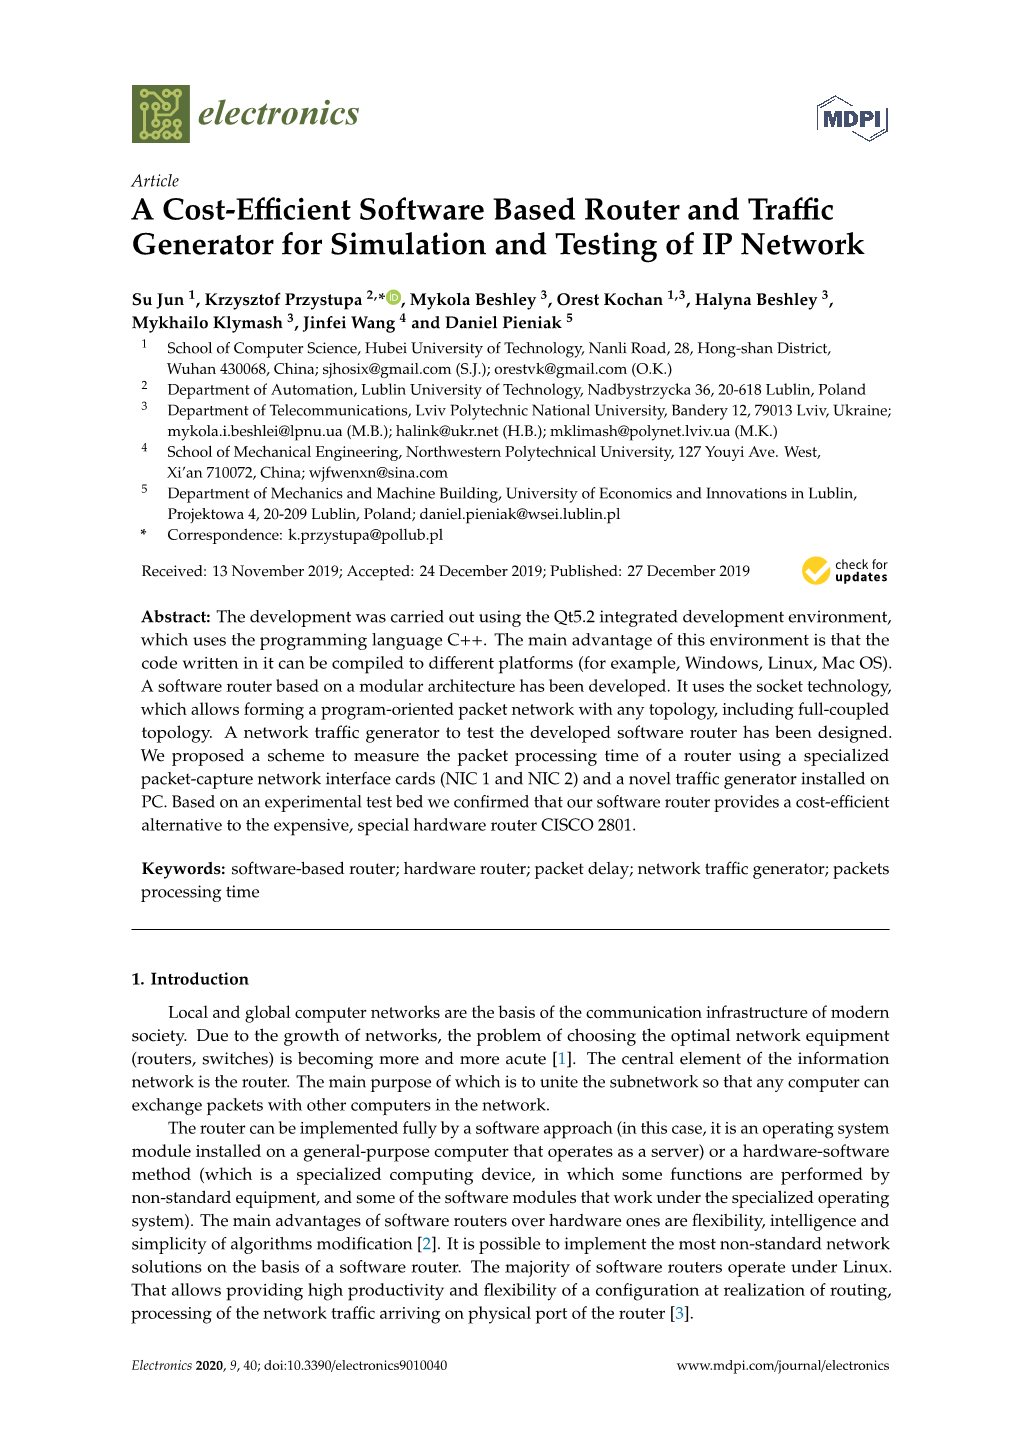 A Cost-Efficient Software Based Router and Traffic Generator for Simulation and Testing of IP Network